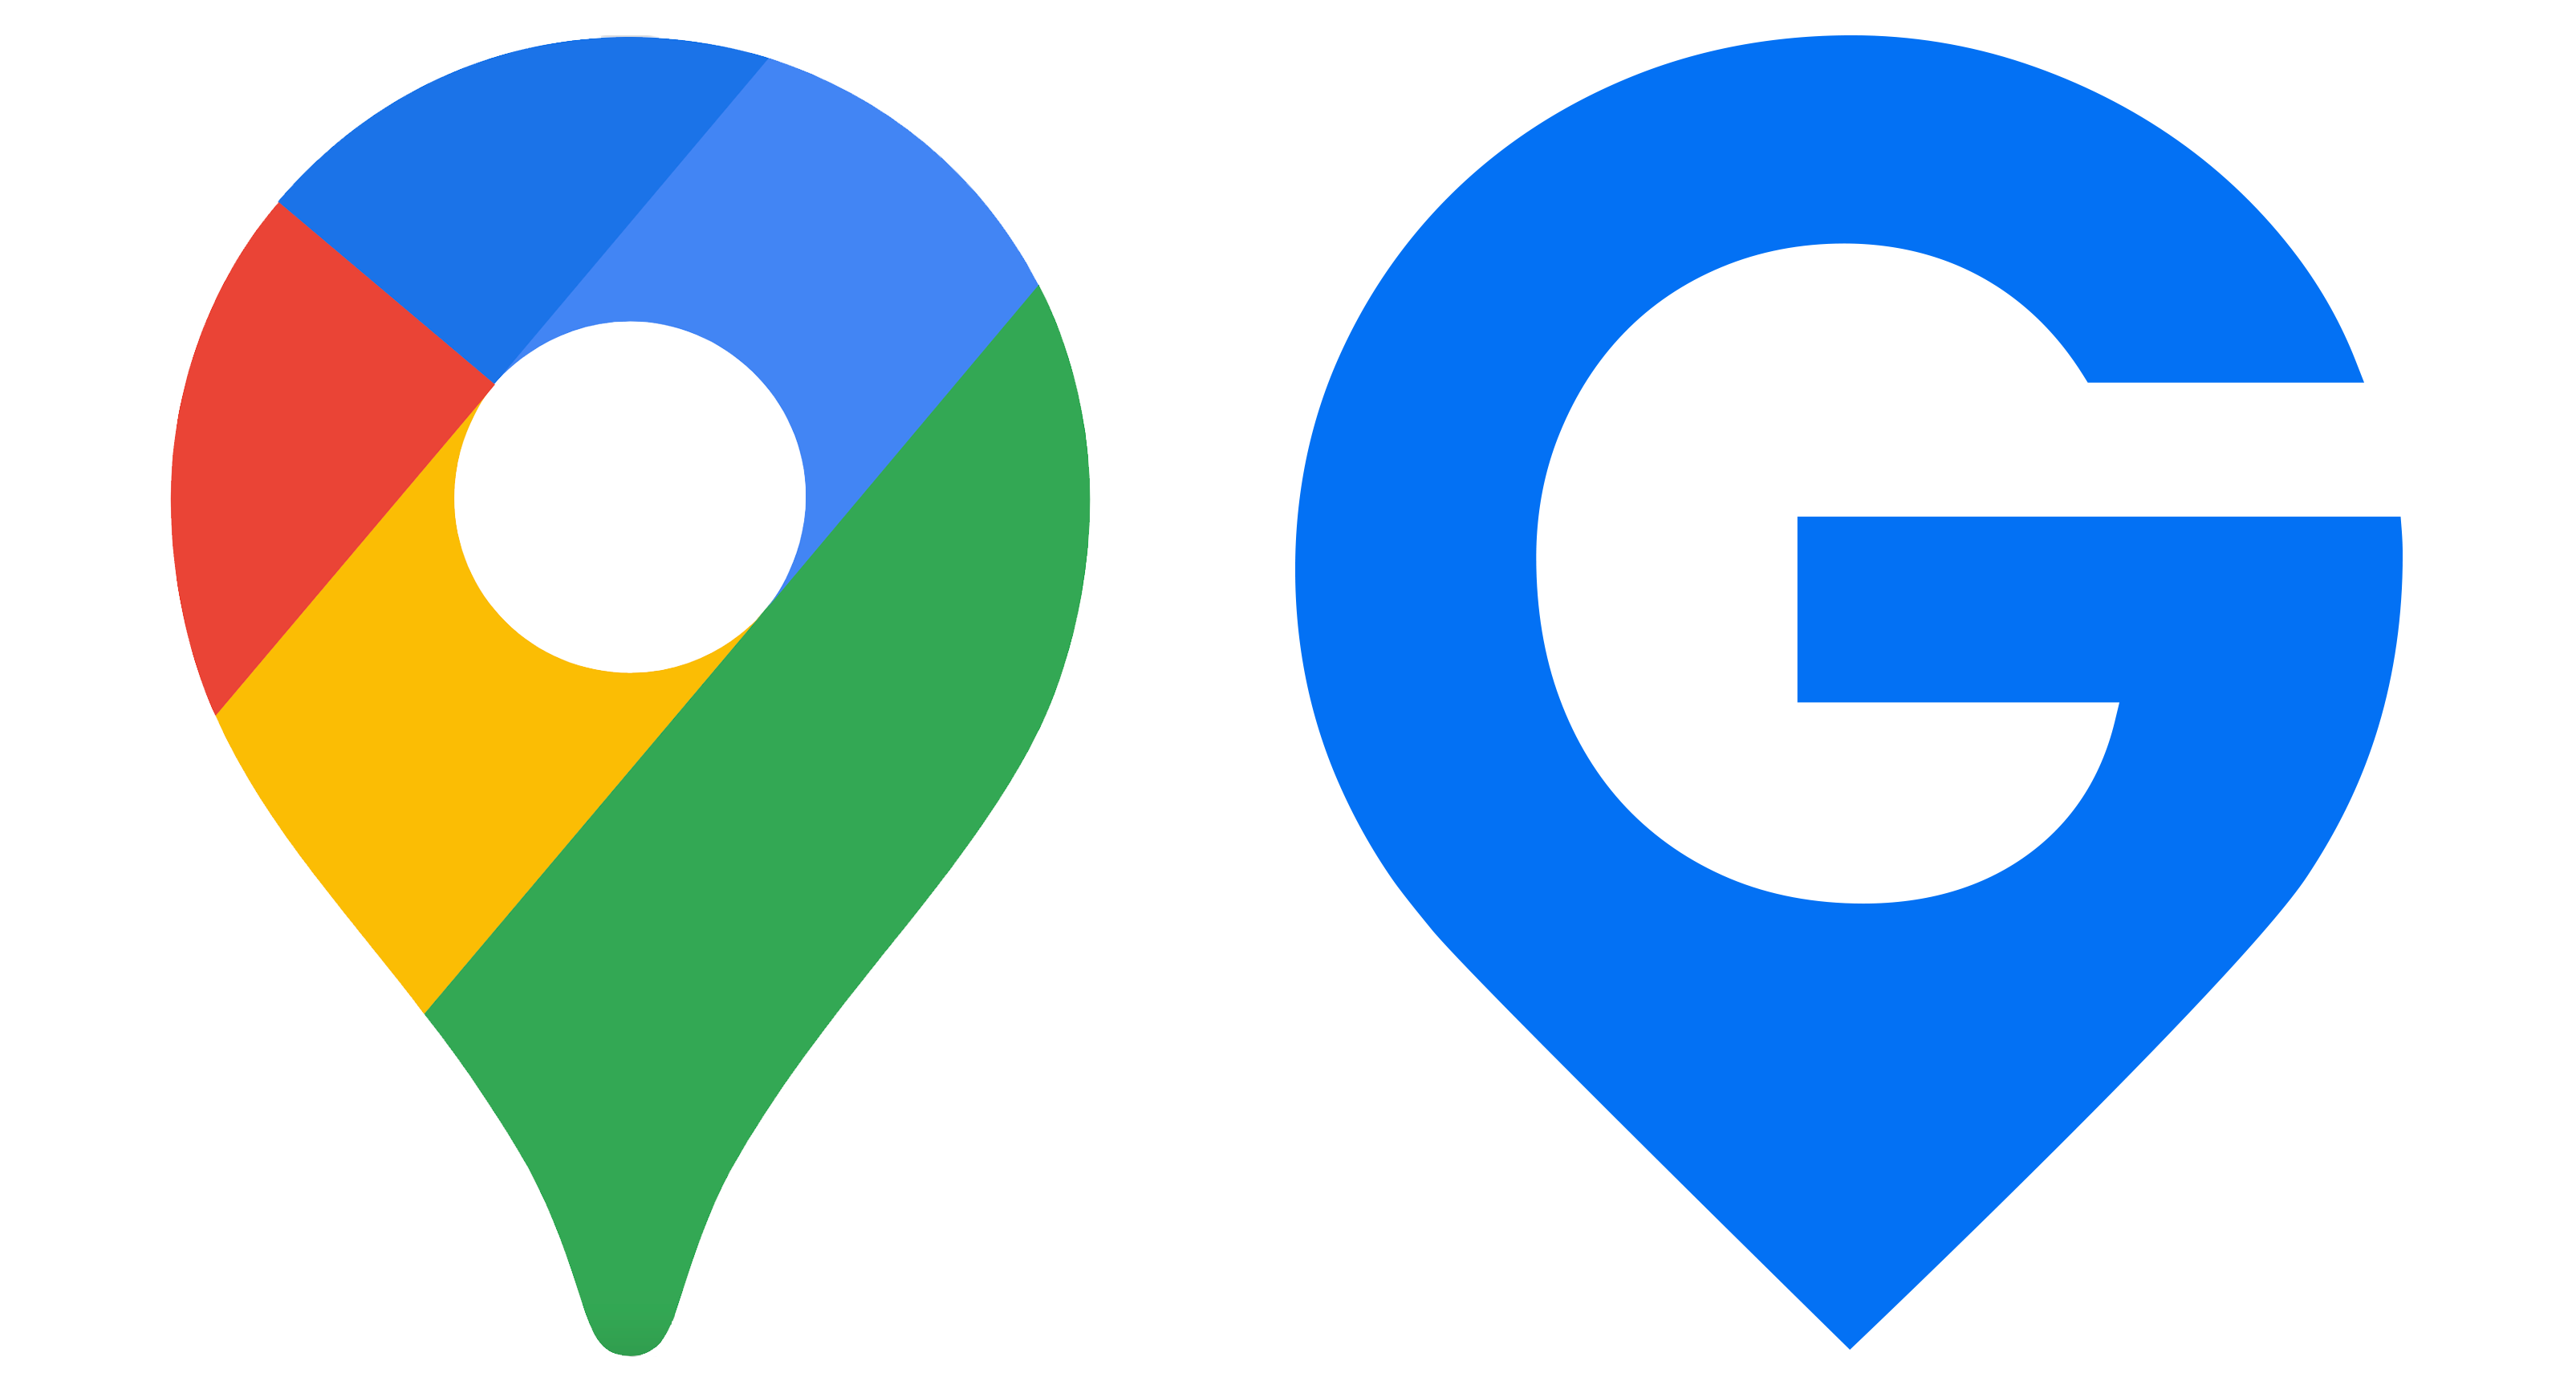 Brand google maps - Download free icons